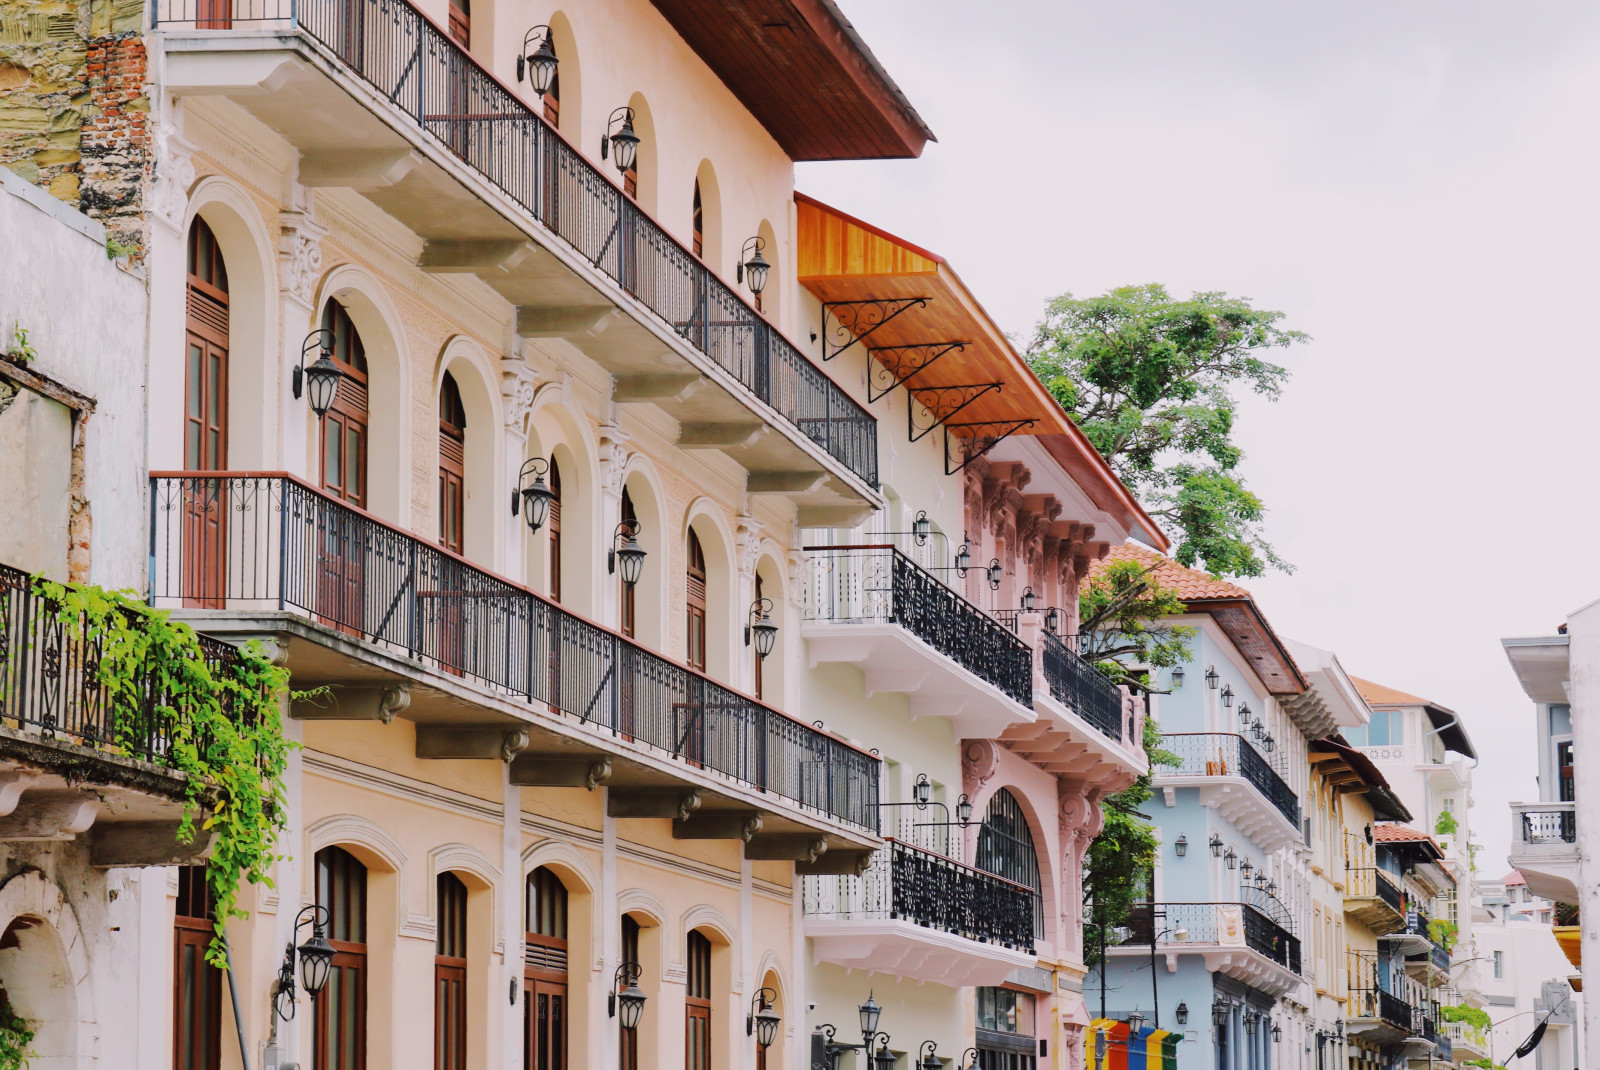 Casco Viejo's colorful, colonial-style homes in Panama City. 